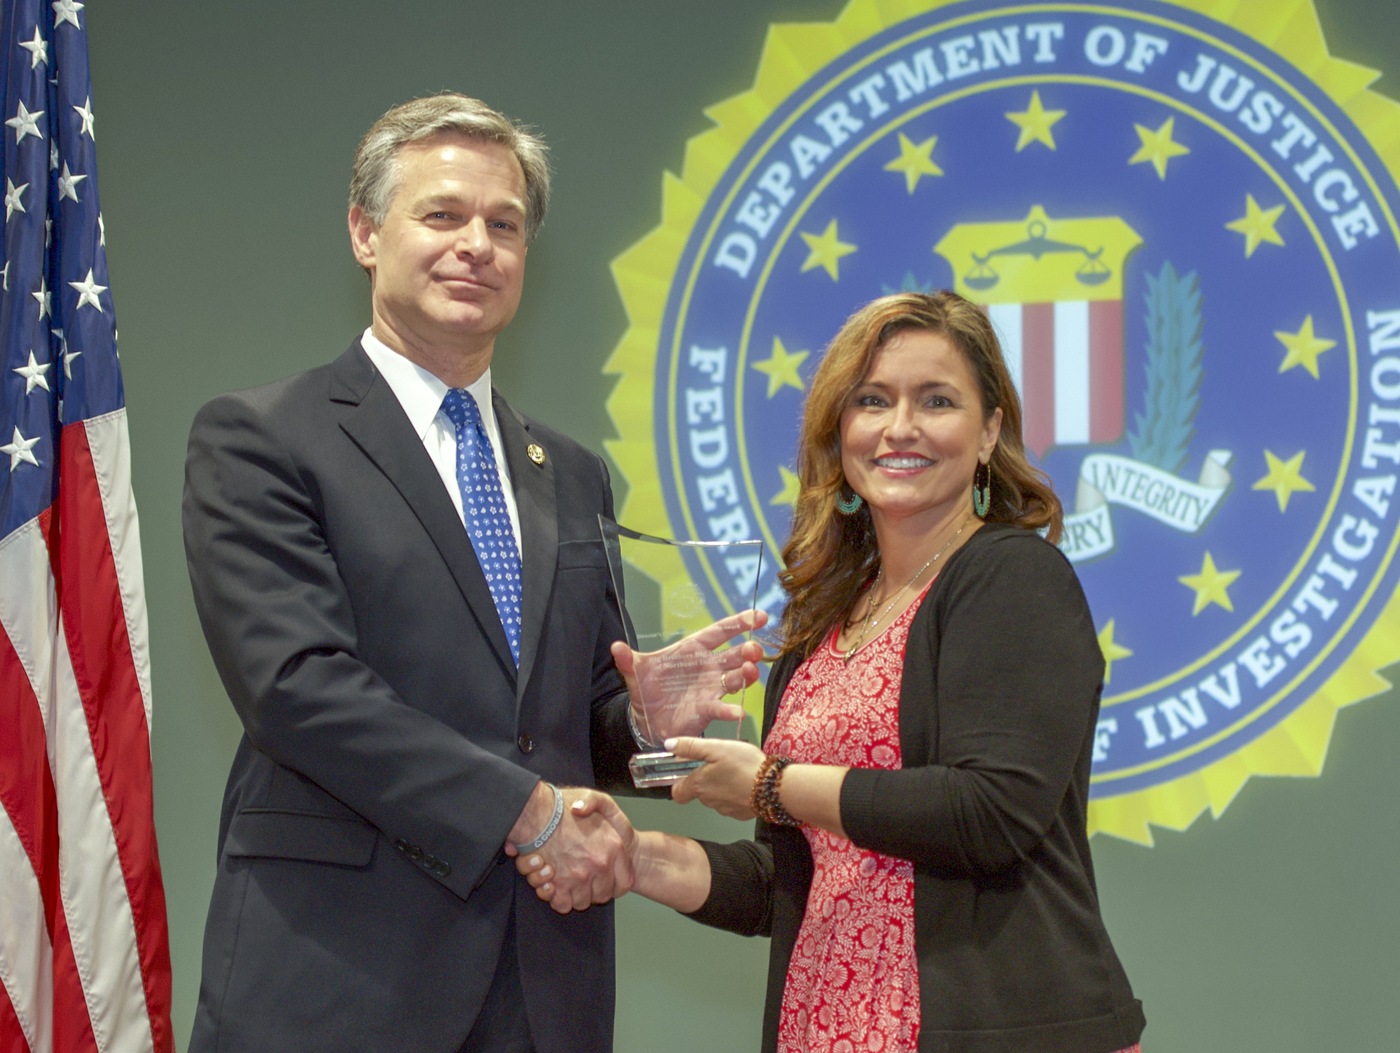 FBI Director Christopher Wray presents Indianapolis Division recipient Big Brothers Big Sisters of Northeast Indiana (represented by Josette Rider) with the Director’s Community Leadership Award (DCLA) at a ceremony at FBI Headquarters on May 3, 2019.